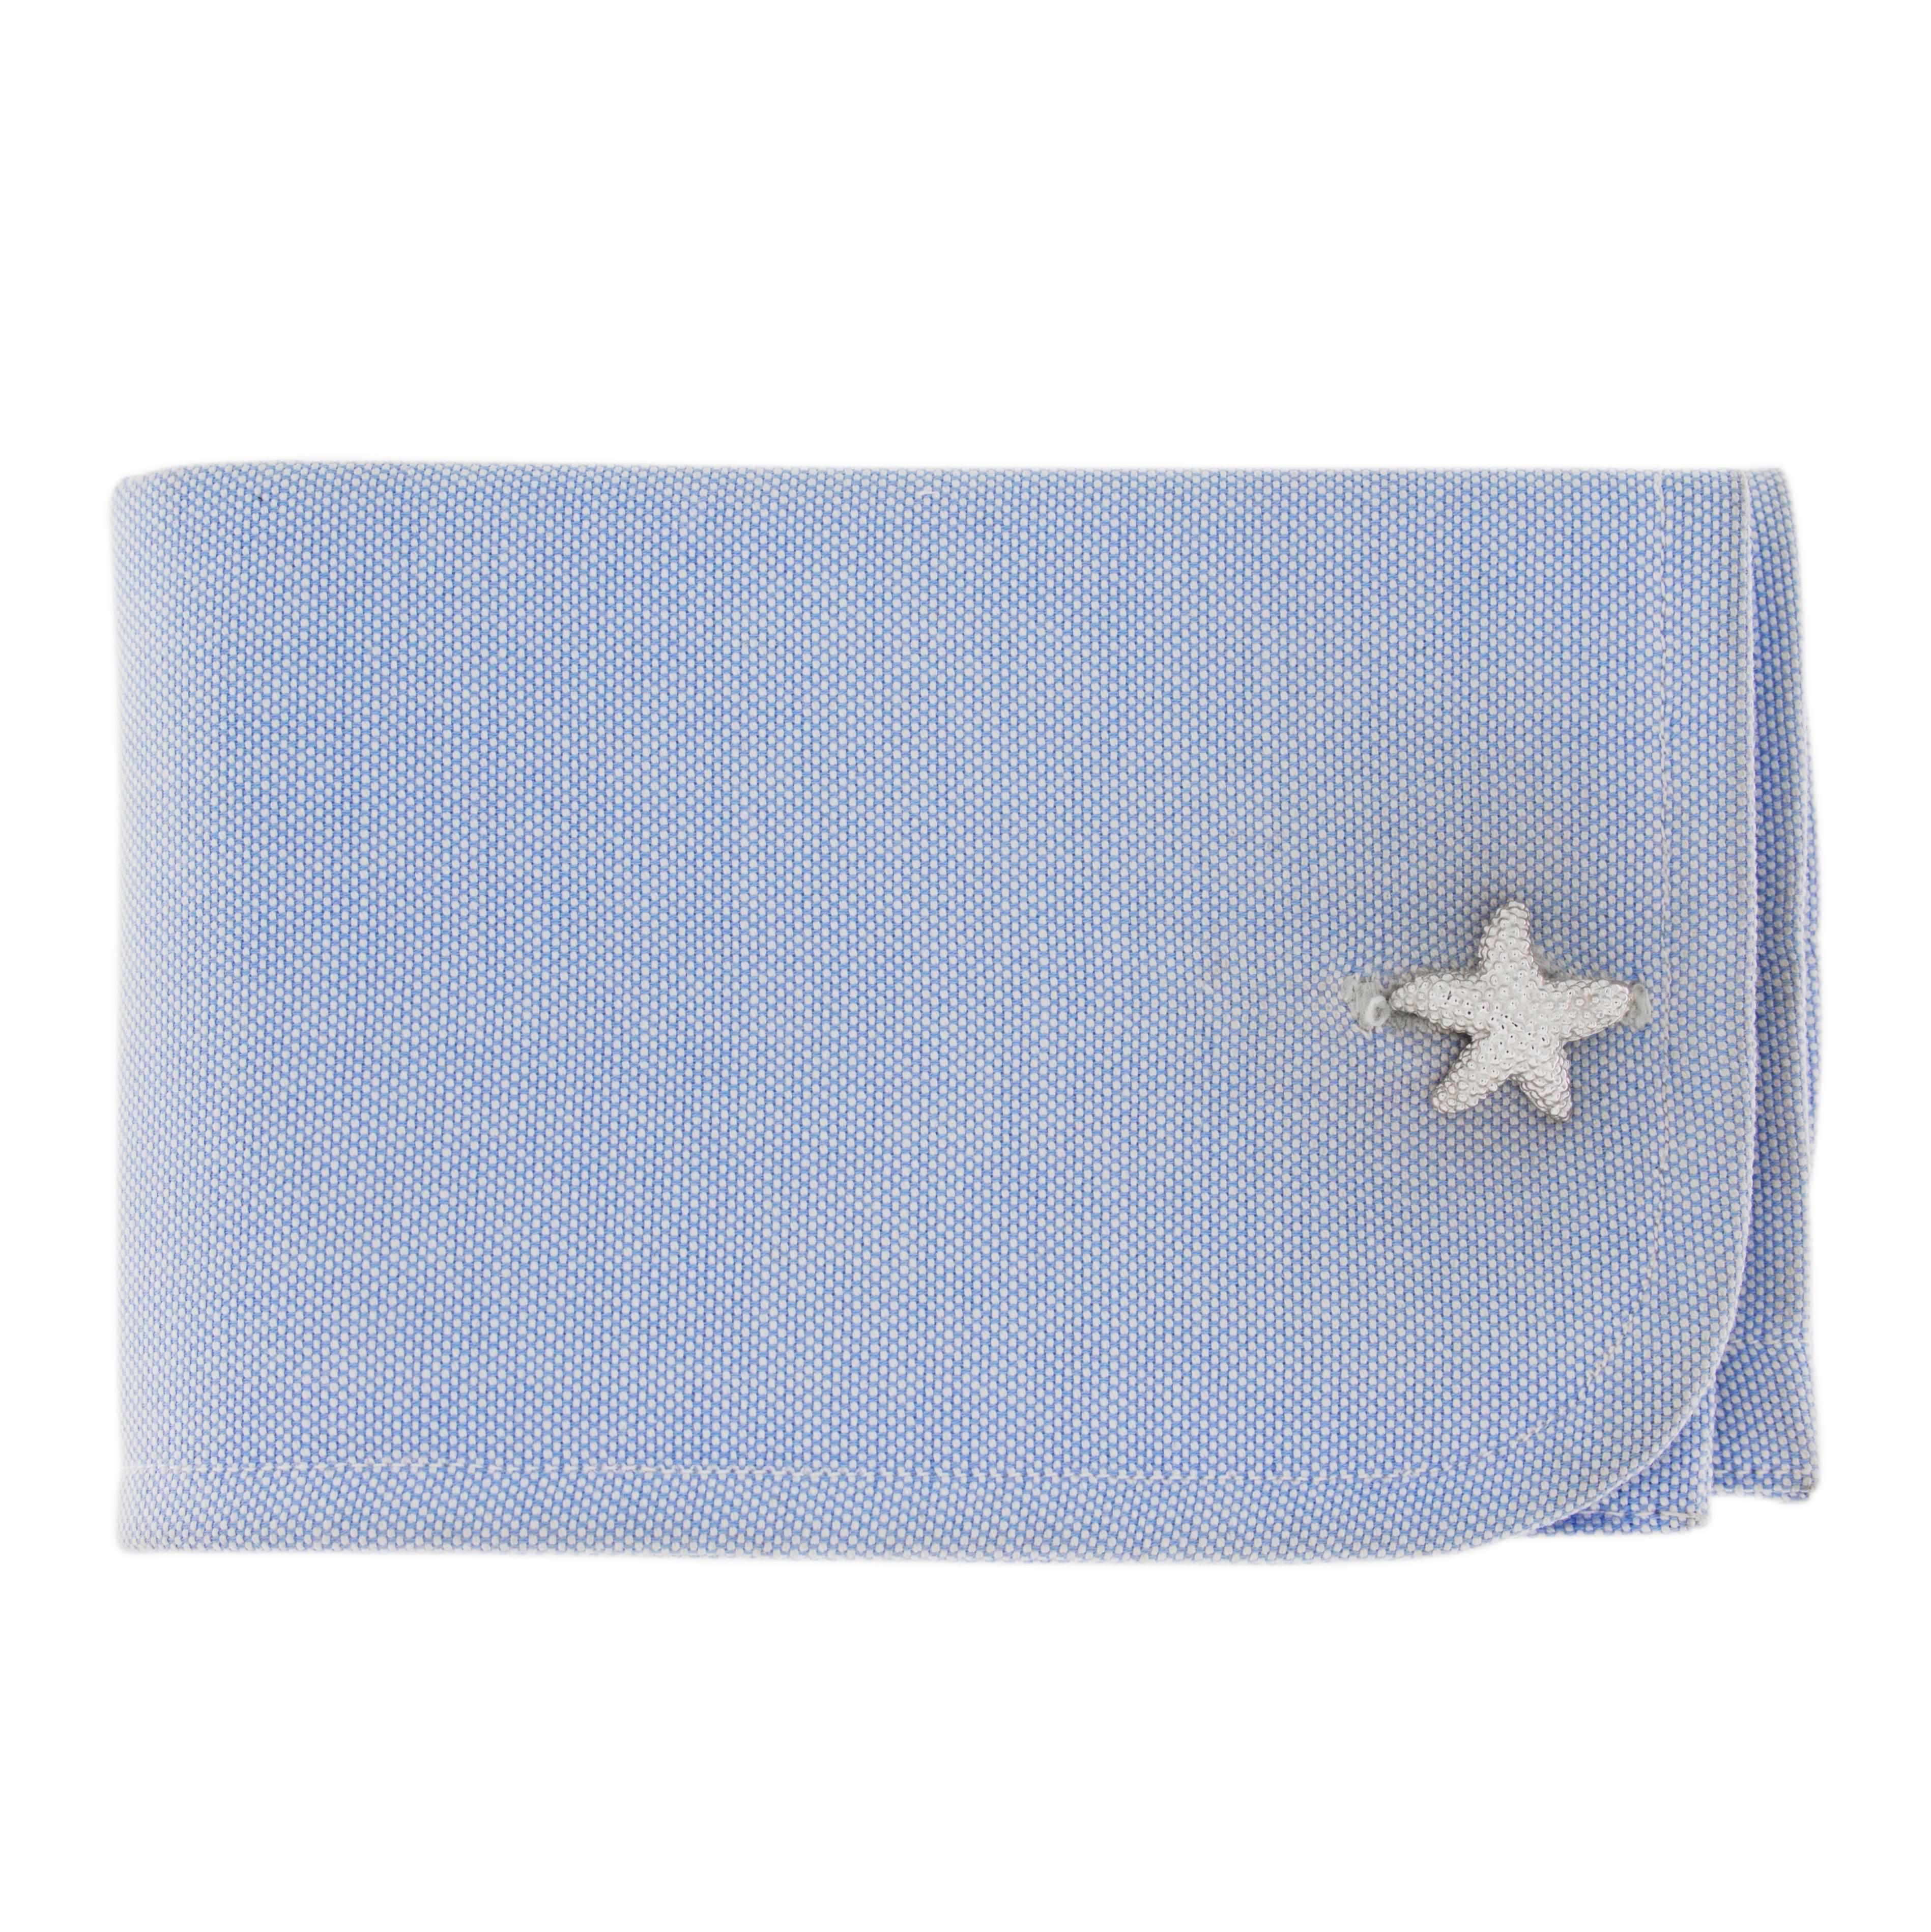 Jona design collection, hand crafted in Italy, starfish sterling silver rhodium plated cufflinks.  Marked JONA.
All Jona jewelry is new and has never been previously owned or worn. Each item will arrive at your door beautifully gift wrapped in Jona